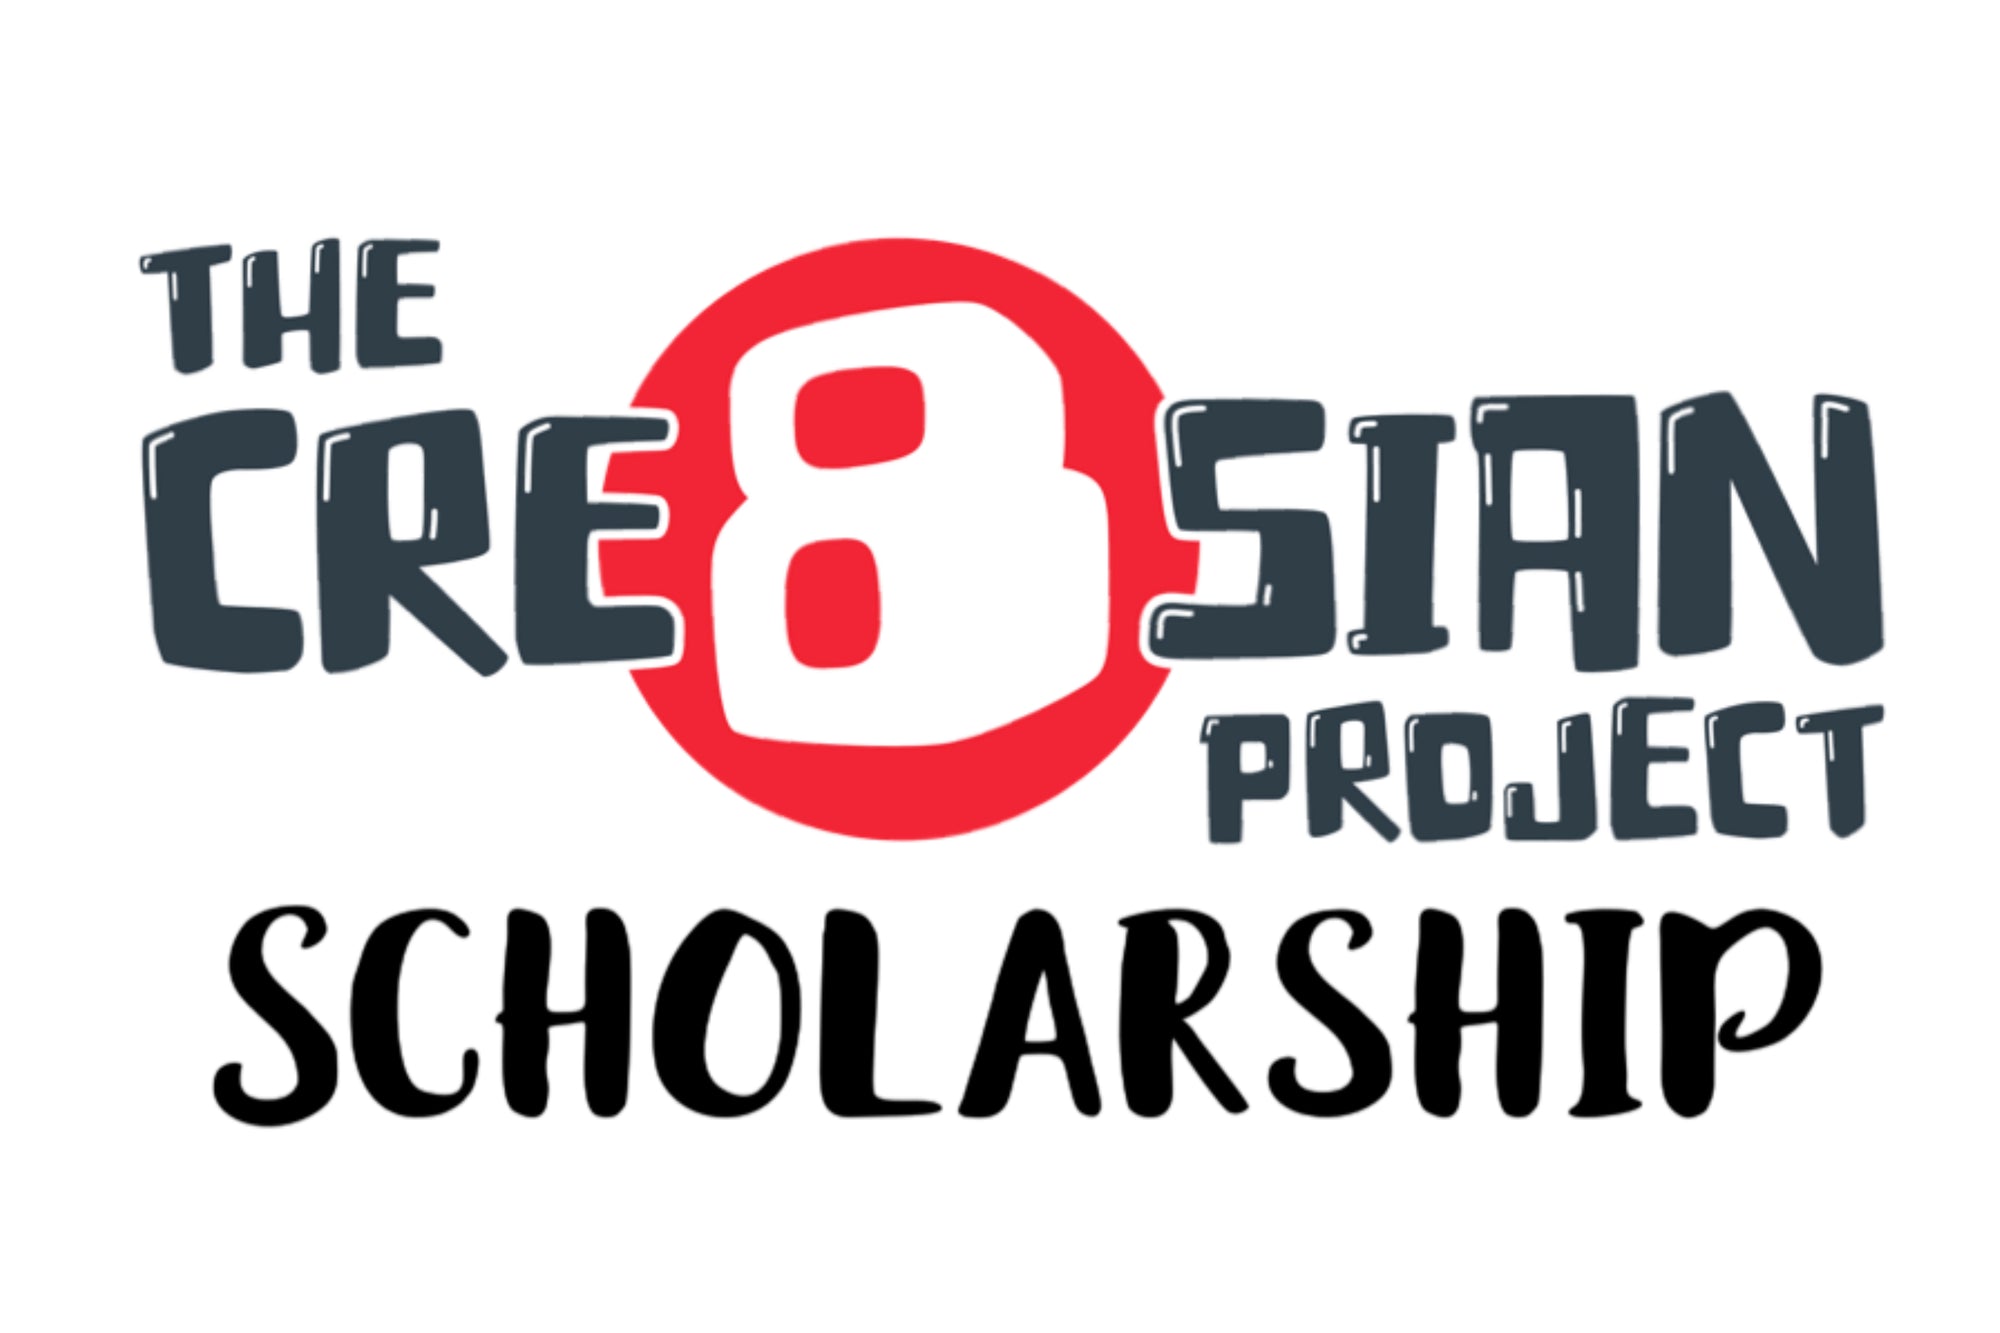 Announcing the 2021-22 Cre8sian Project Scholarships!